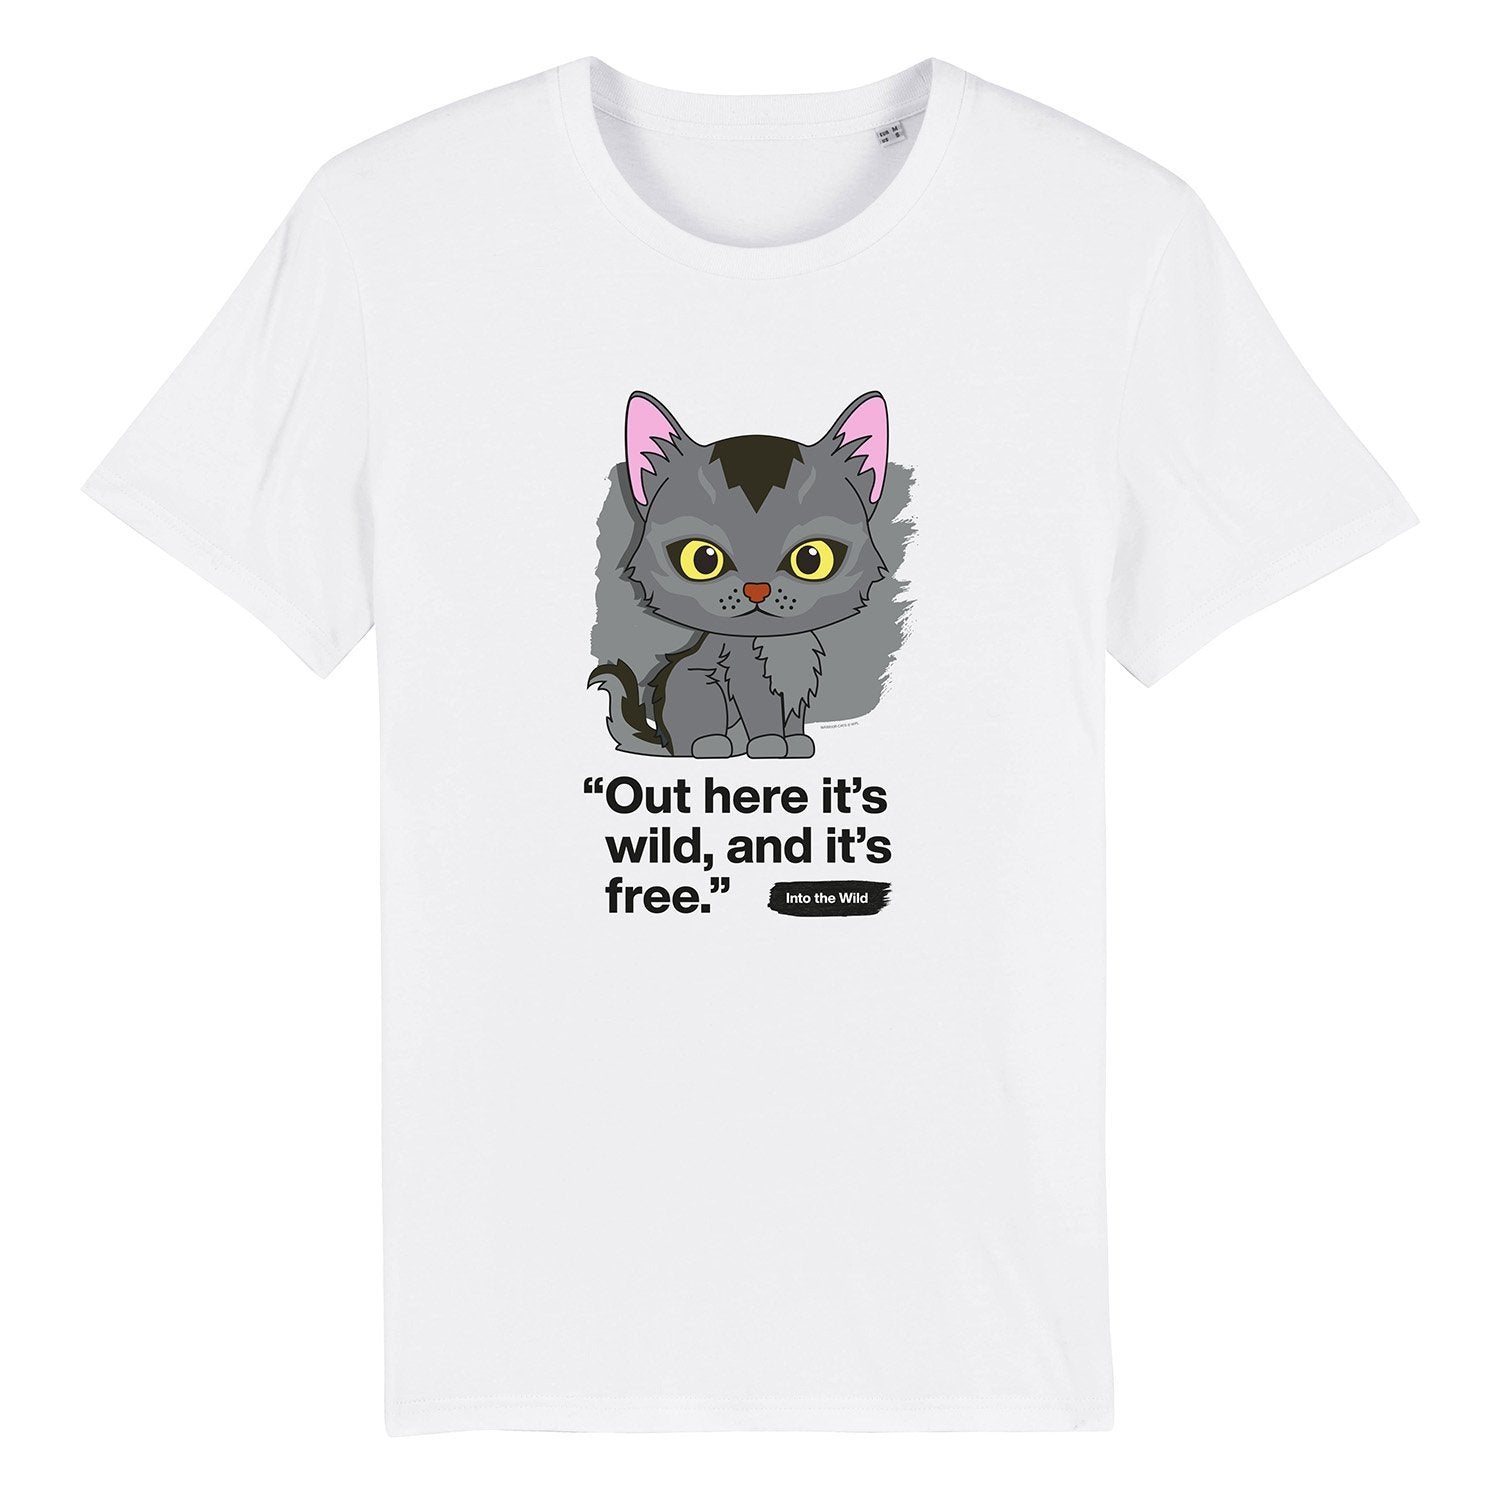 Out here it's wild - Graystripe - Adult Unisex T-Shirt